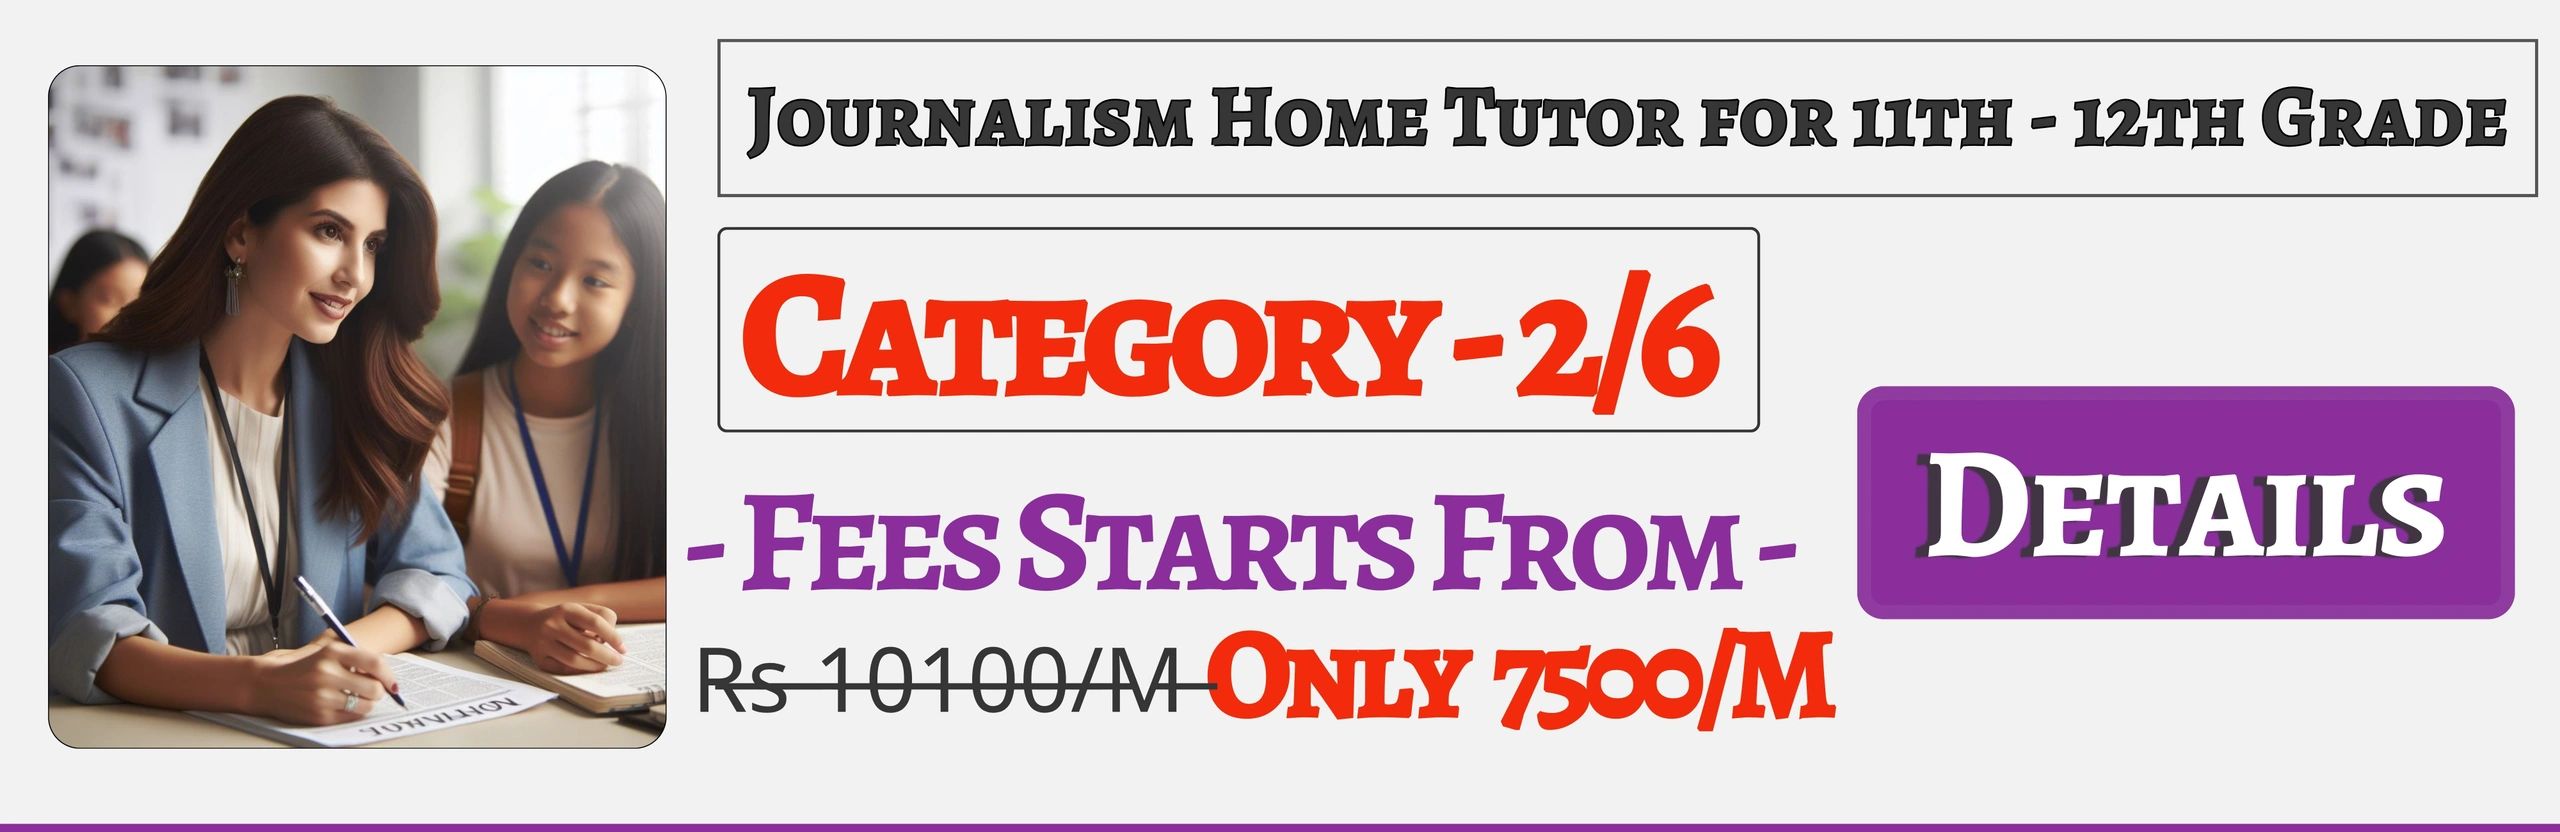 Book Best Nearby Journalism Home Tuition Tutors For 11th & 12th In Jaipur , Fees Only 7500/M